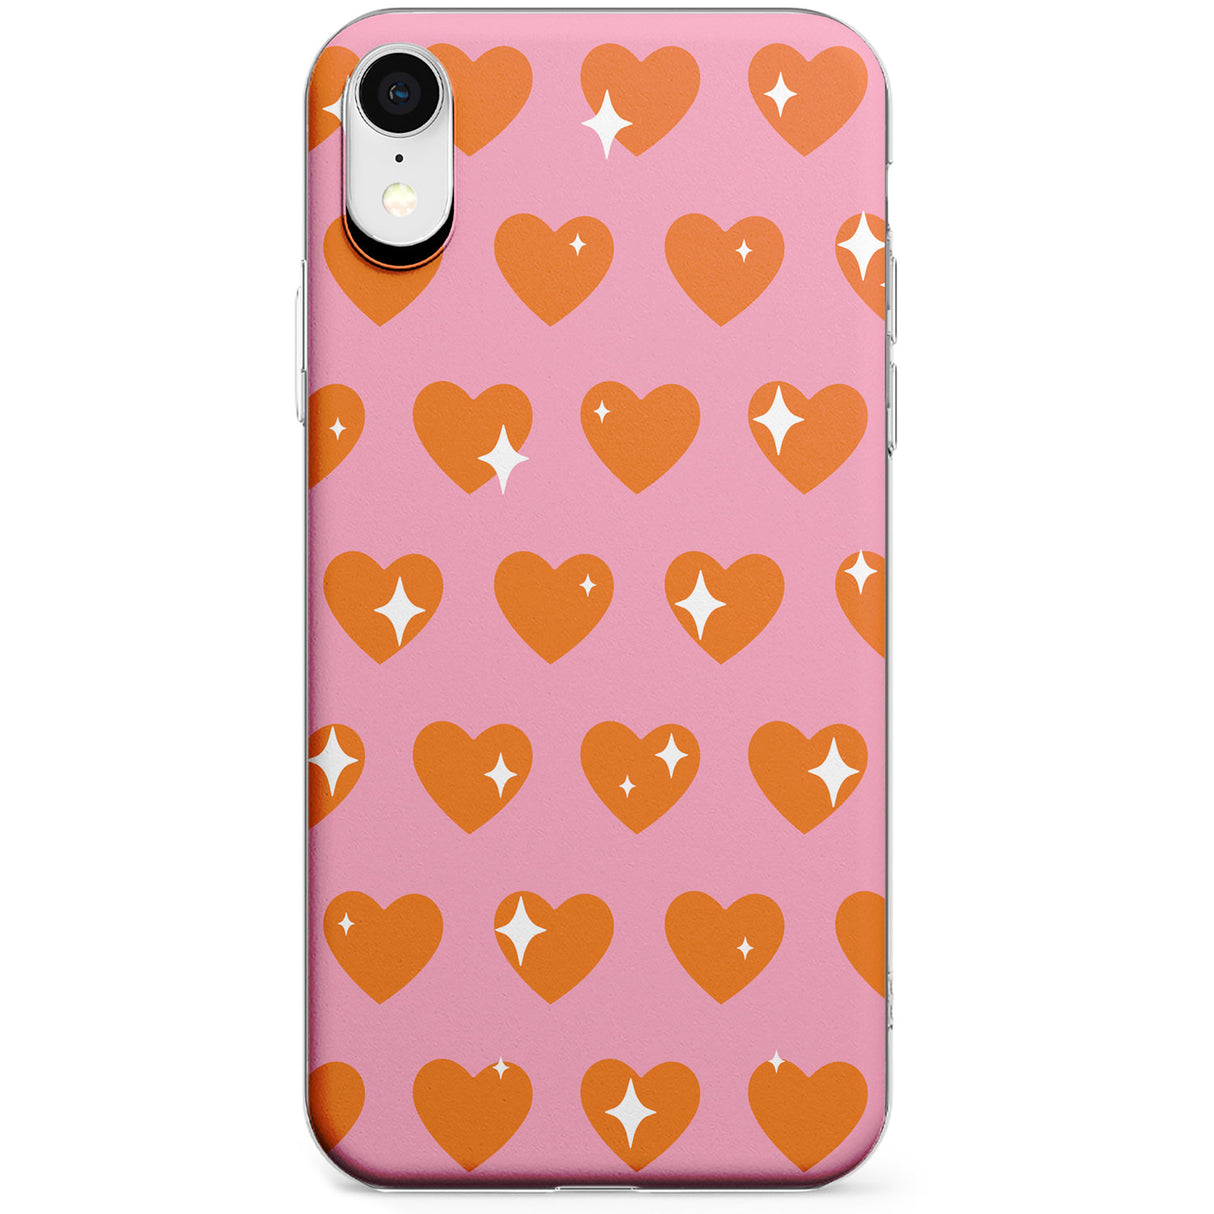 Sweet Hearts (Sunset) Phone Case for iPhone X, XS Max, XR